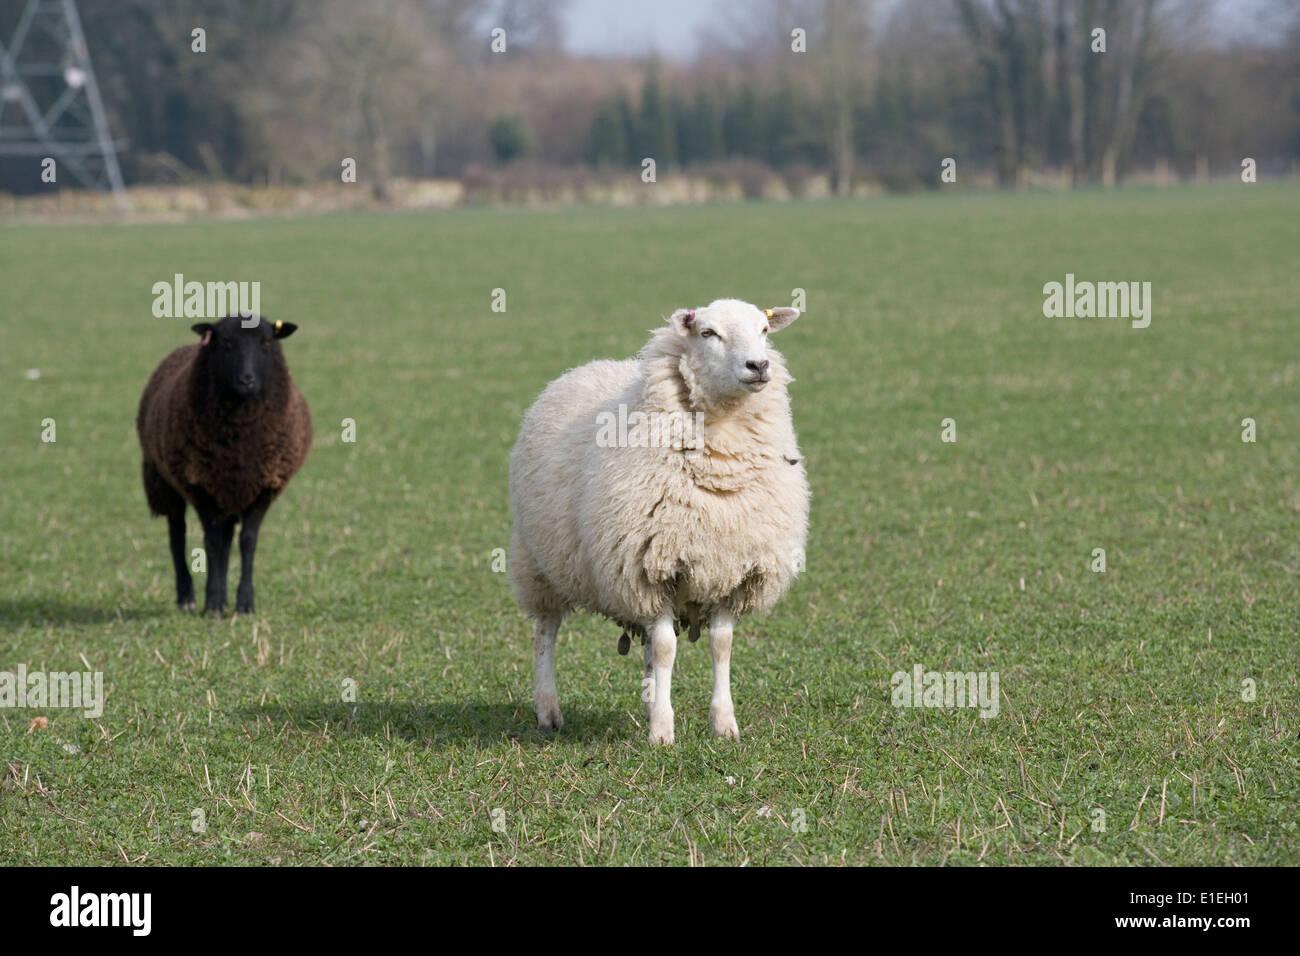 Black & White sheep in a field Banque D'Images